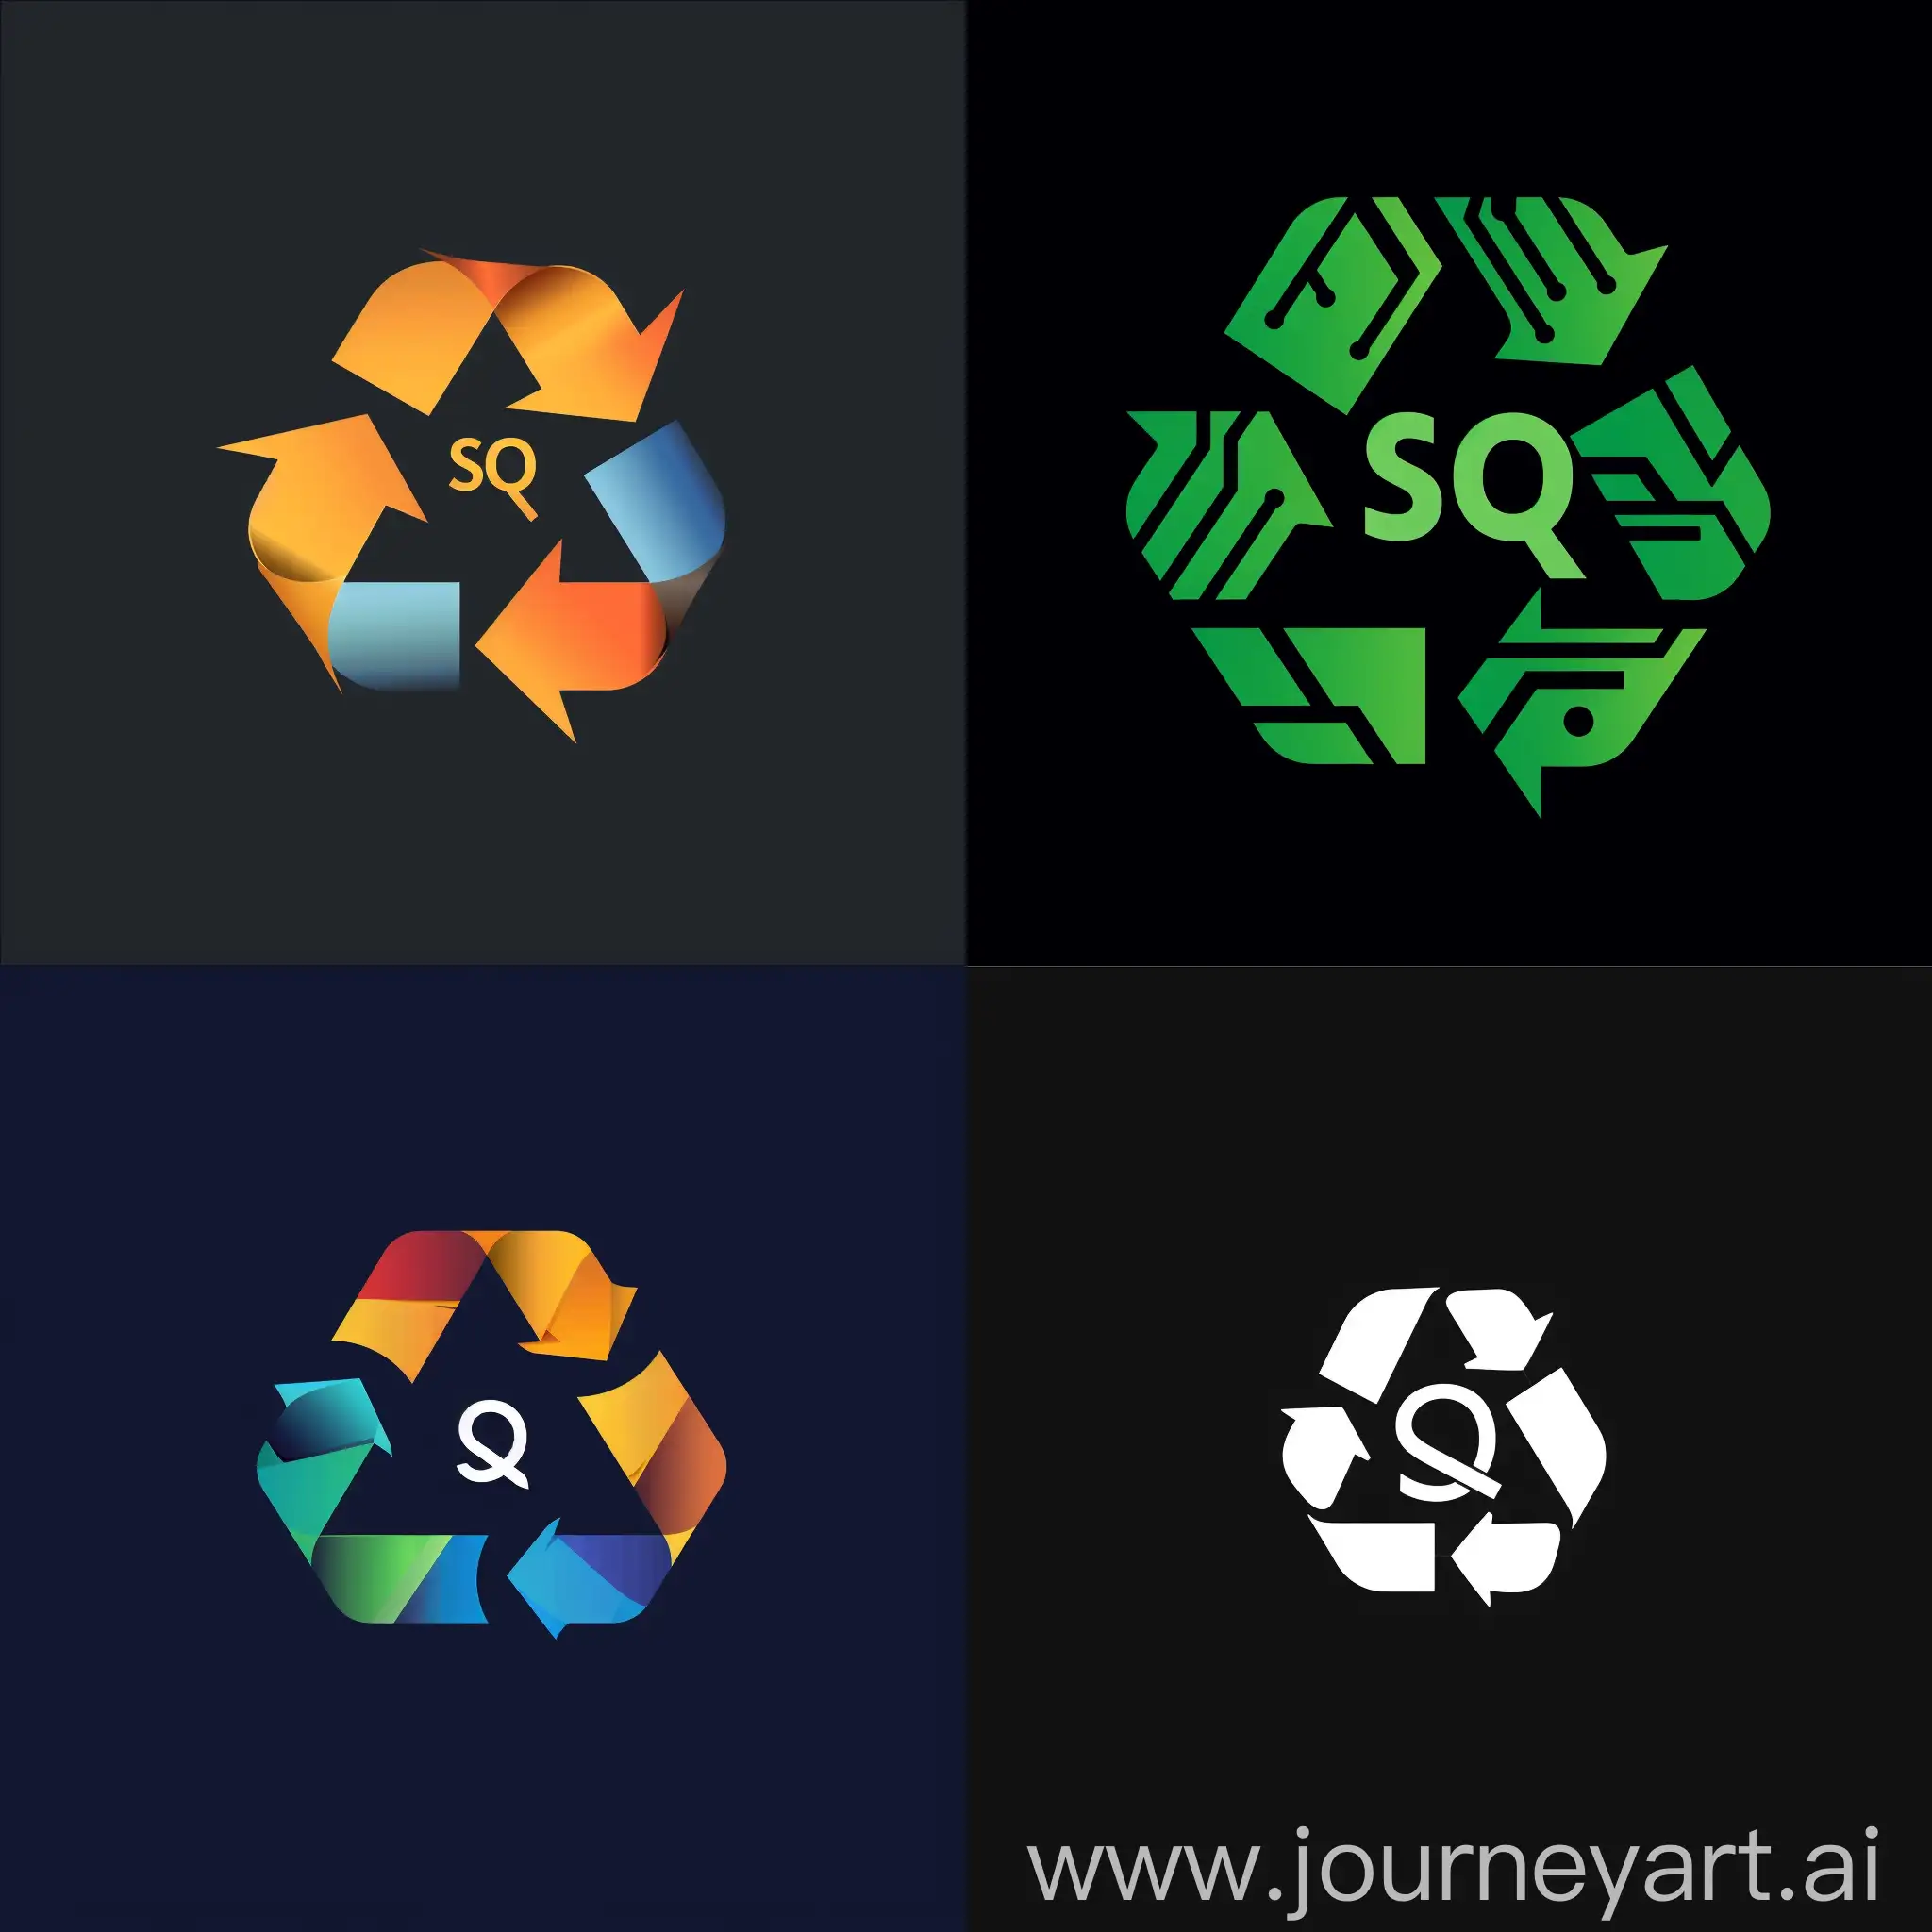 SQ-Electronic-Waste-Recycling-Logo-with-Sustainable-Vision